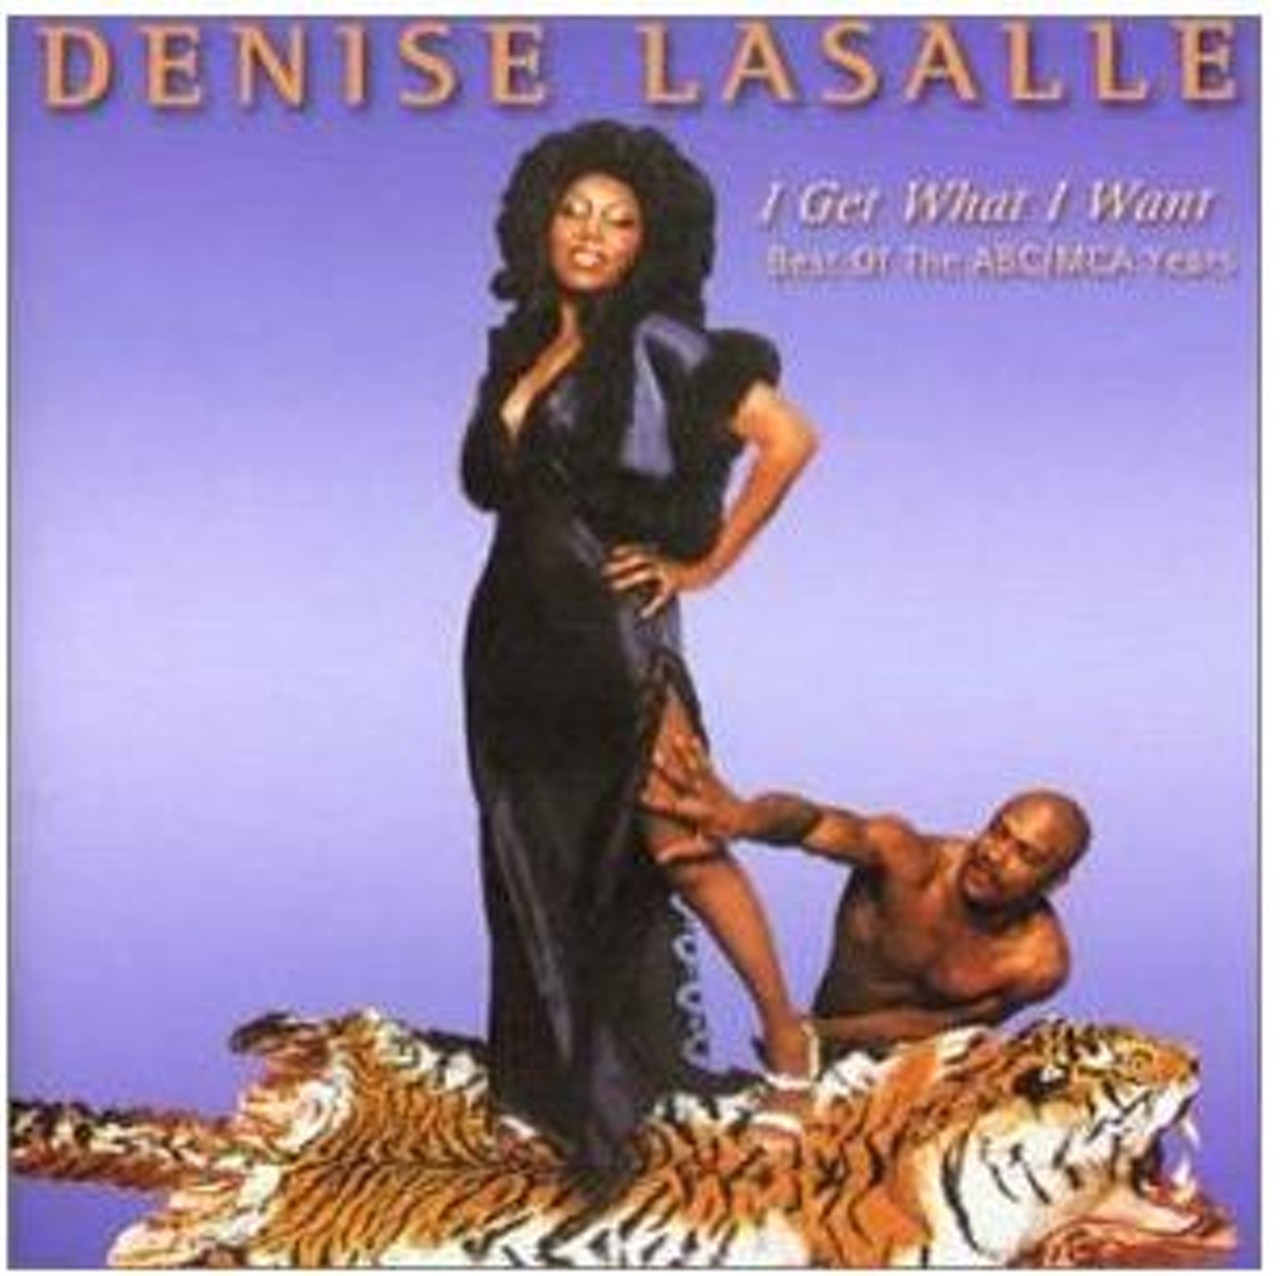 Denise Lasalle: I Get What I Want -- Is there a more bad-ass woman in music than Denise LaSalle?